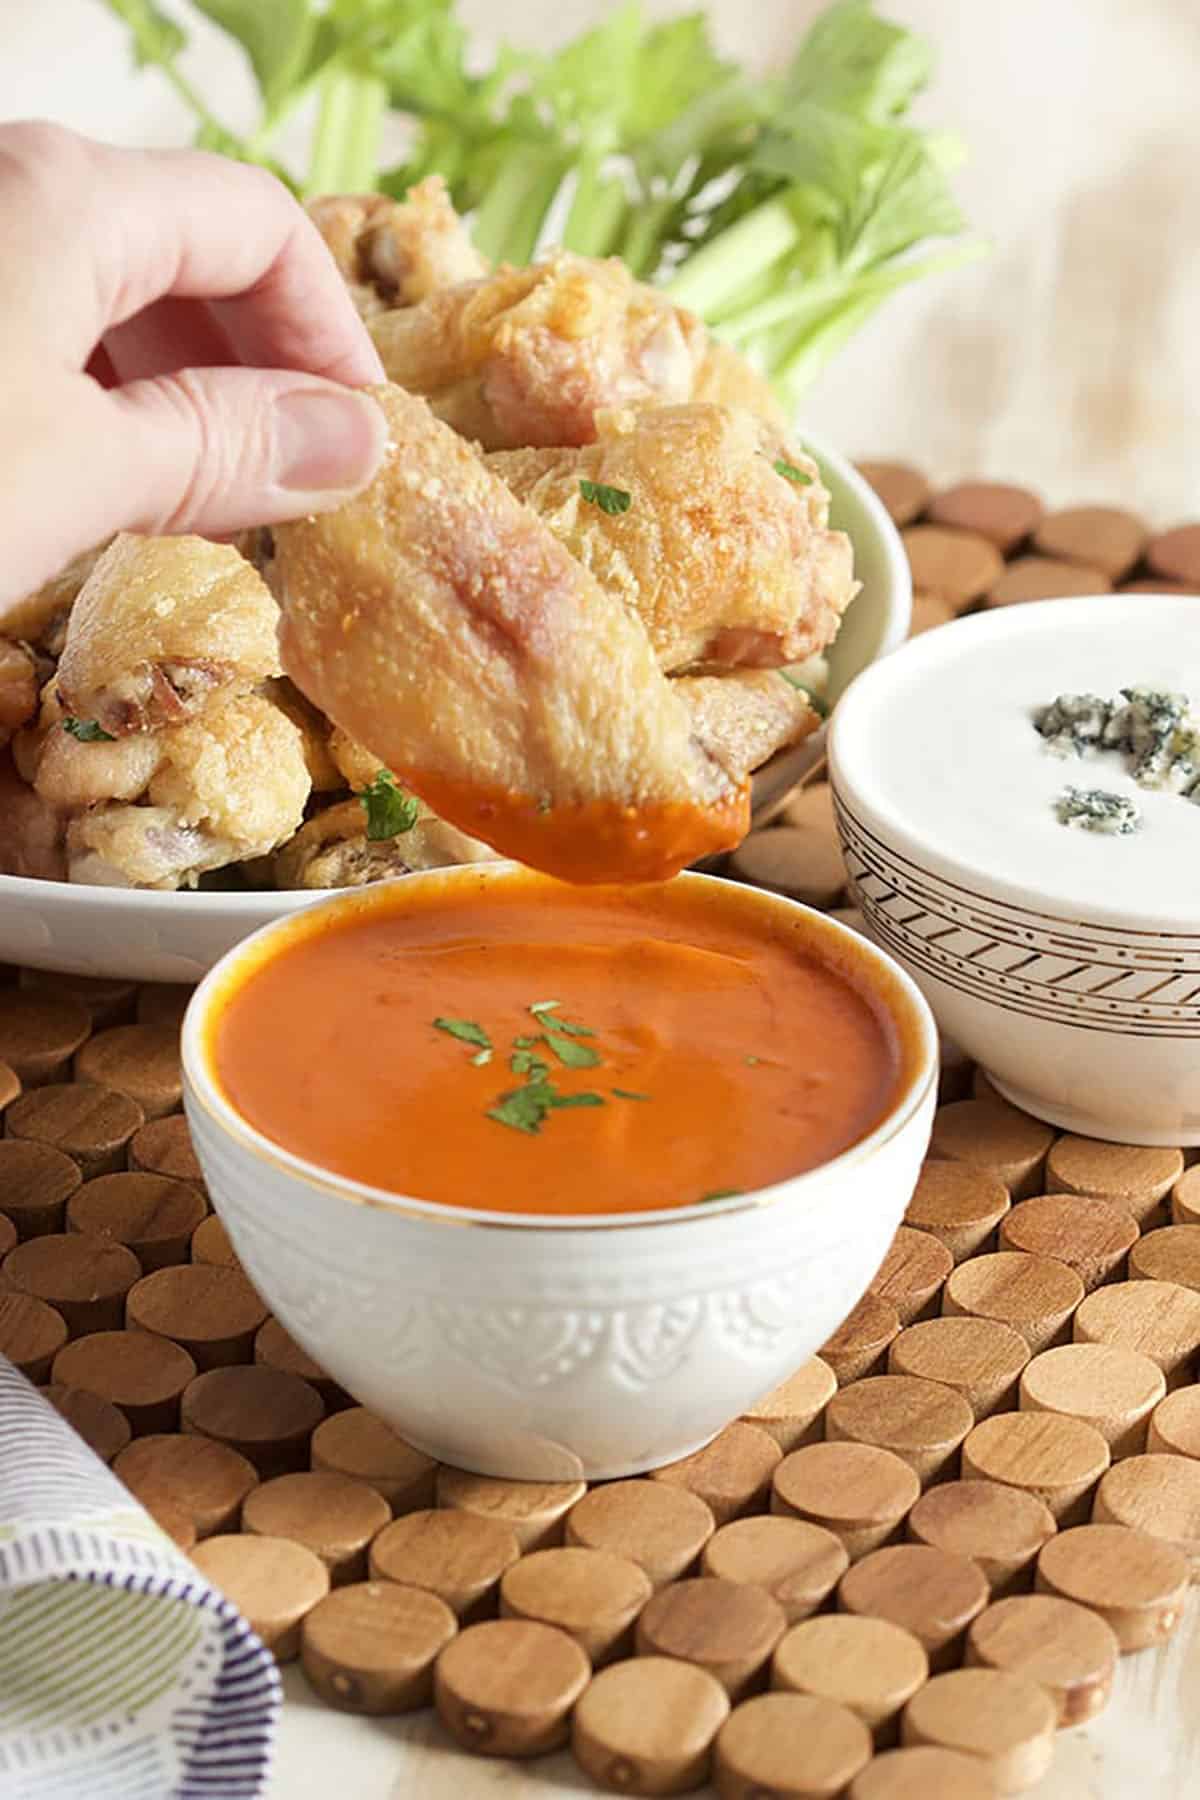 Crispy Baked Chicken Wing being dipped into a bowl of buffalo sauce.